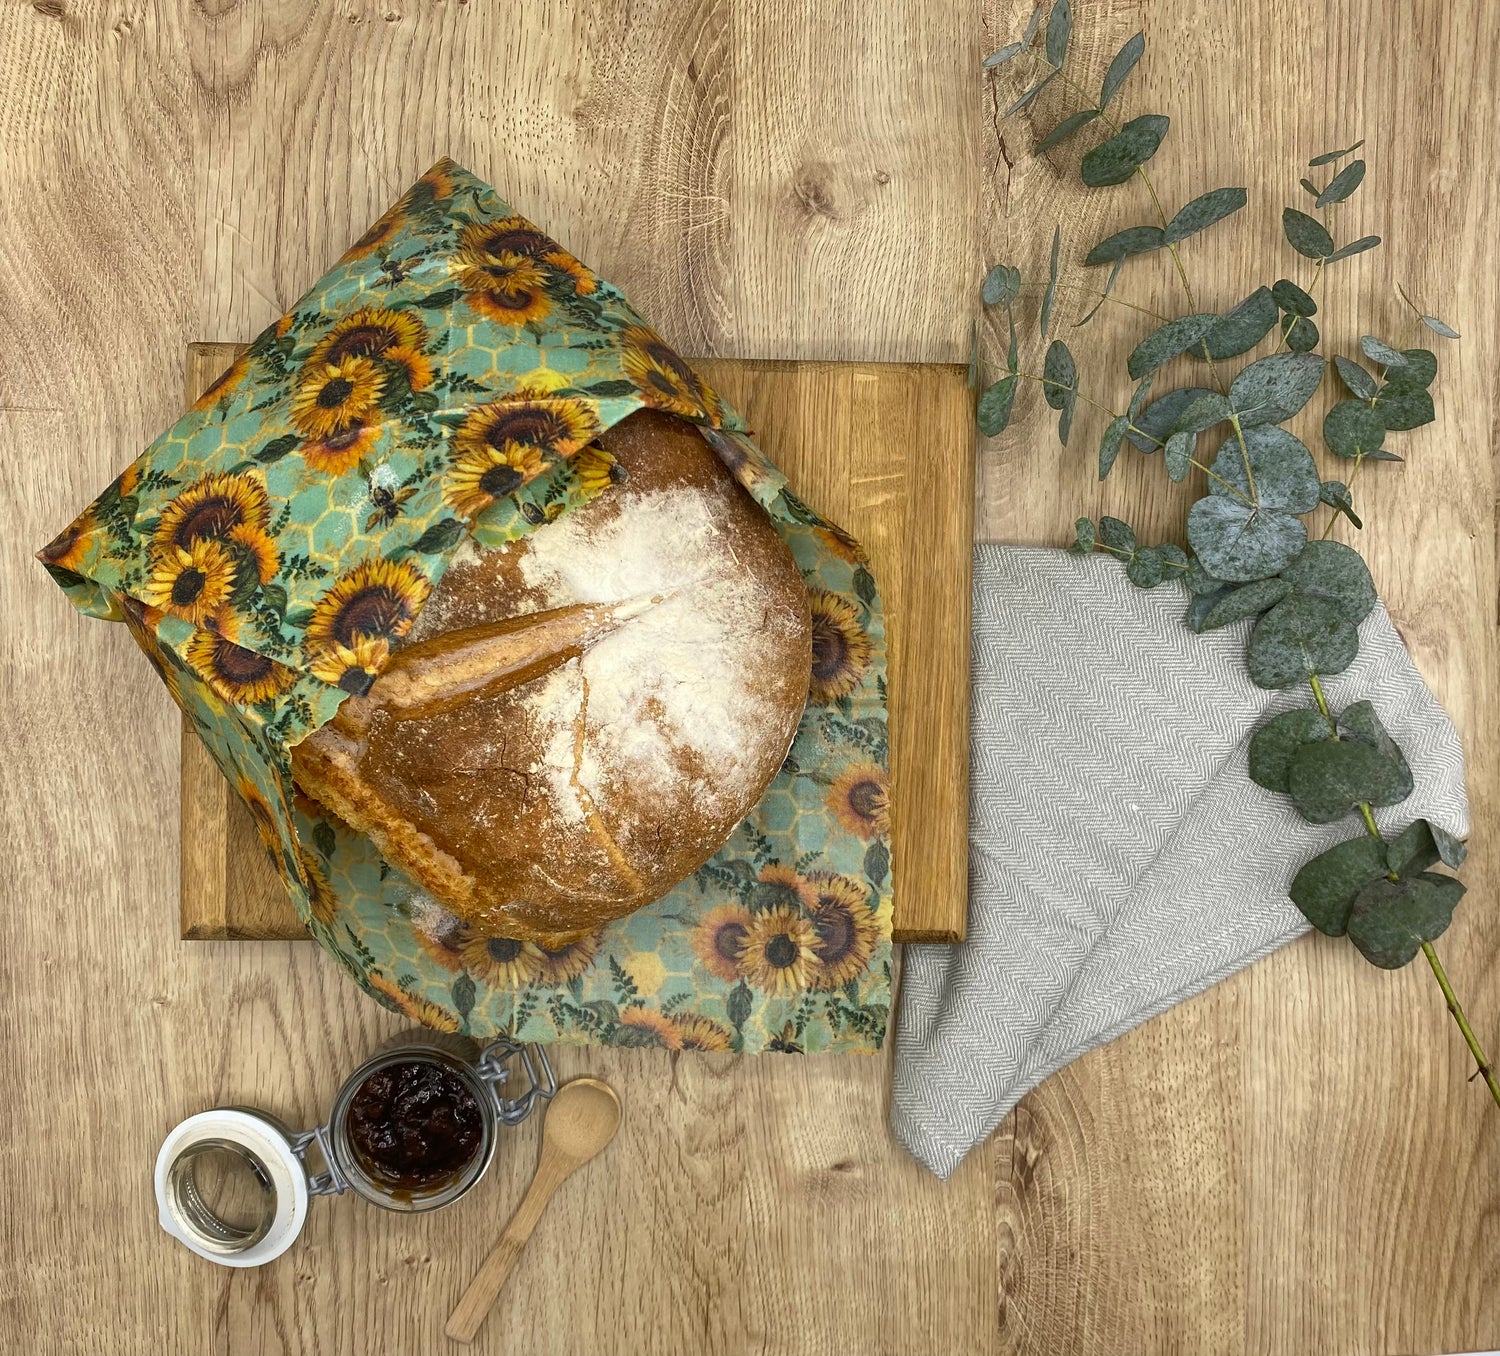 Fresh Bread Wrapped in Handmade Beeswax Wraps